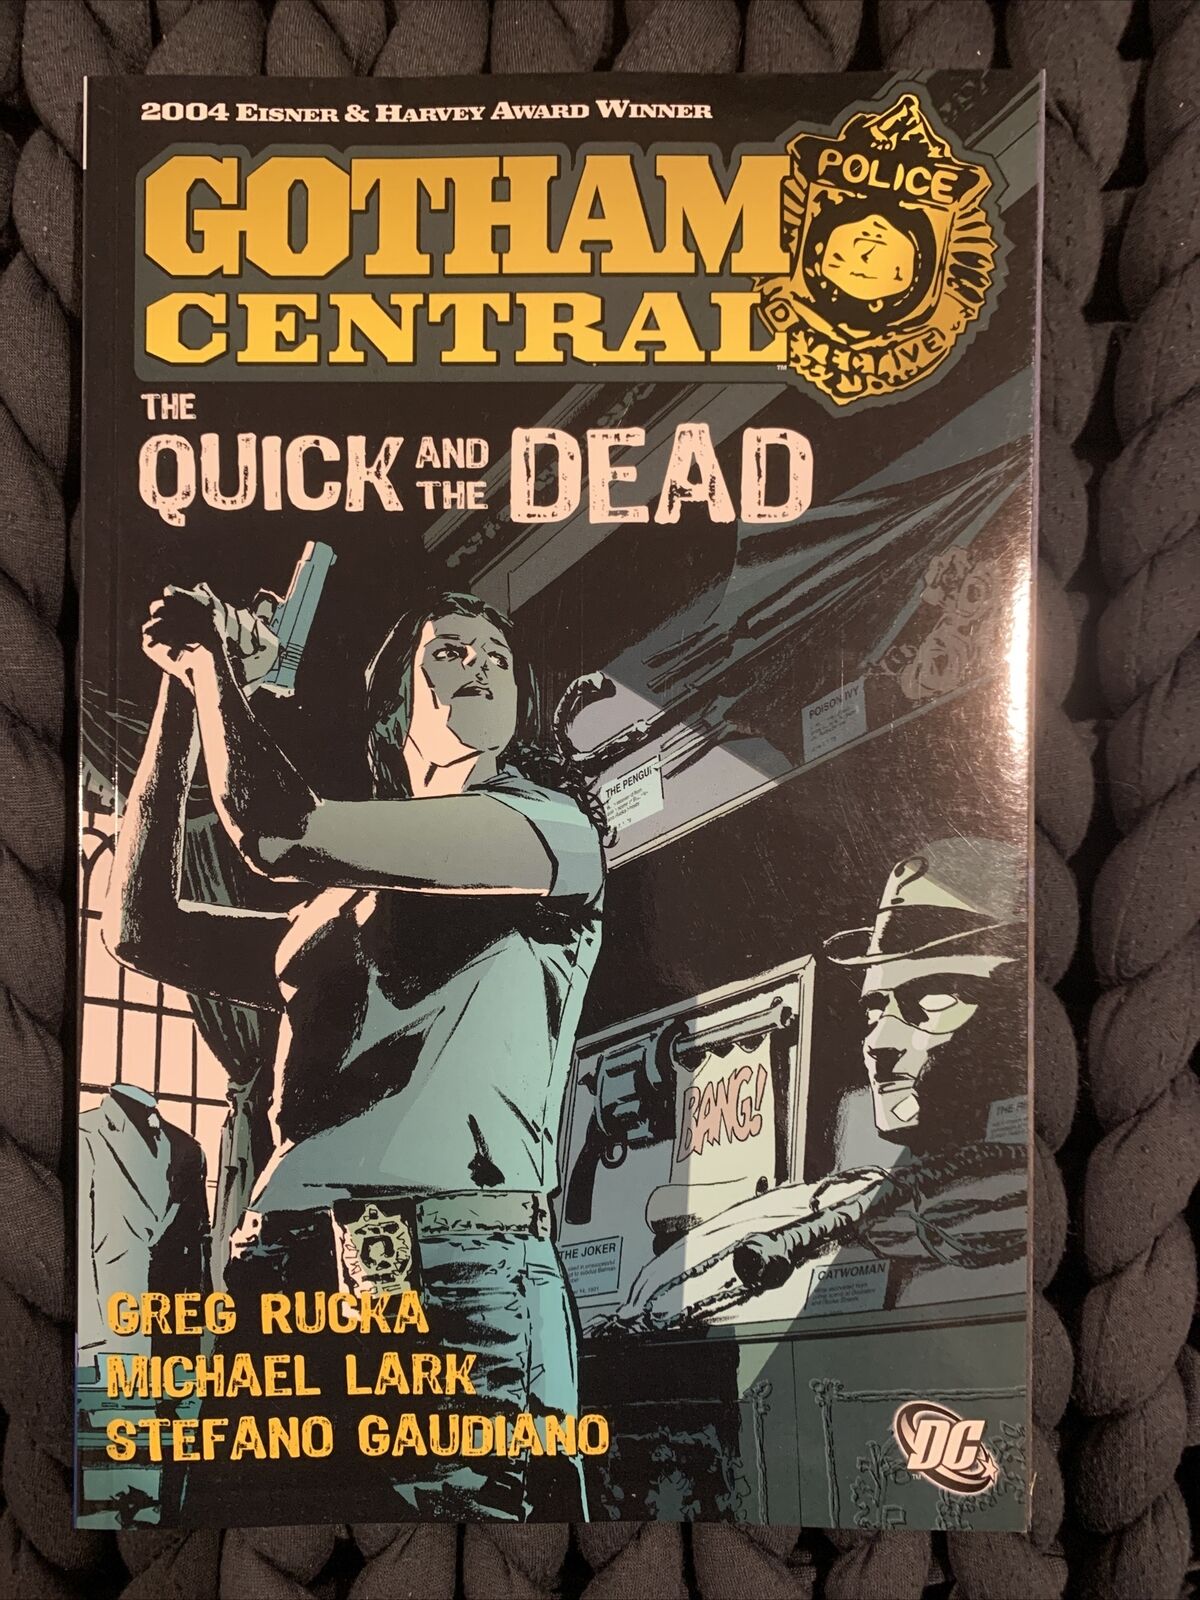 Gotham Central #4: Quick and the Dead by Michael Lark and Greg Rucka (2006, New)